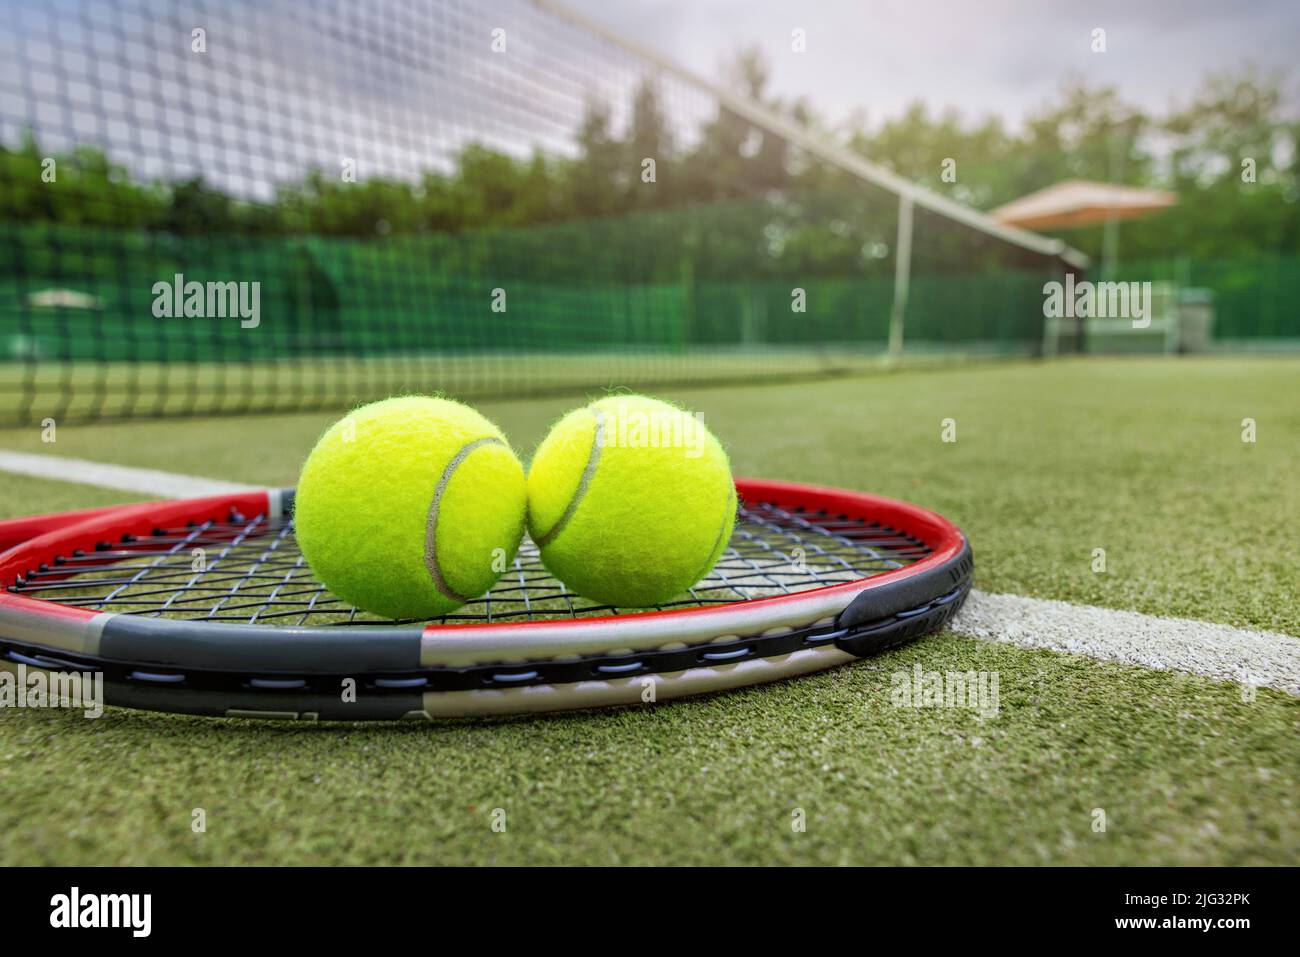 tennis racket and balls on synthetic grass outdoor court Stock Photo